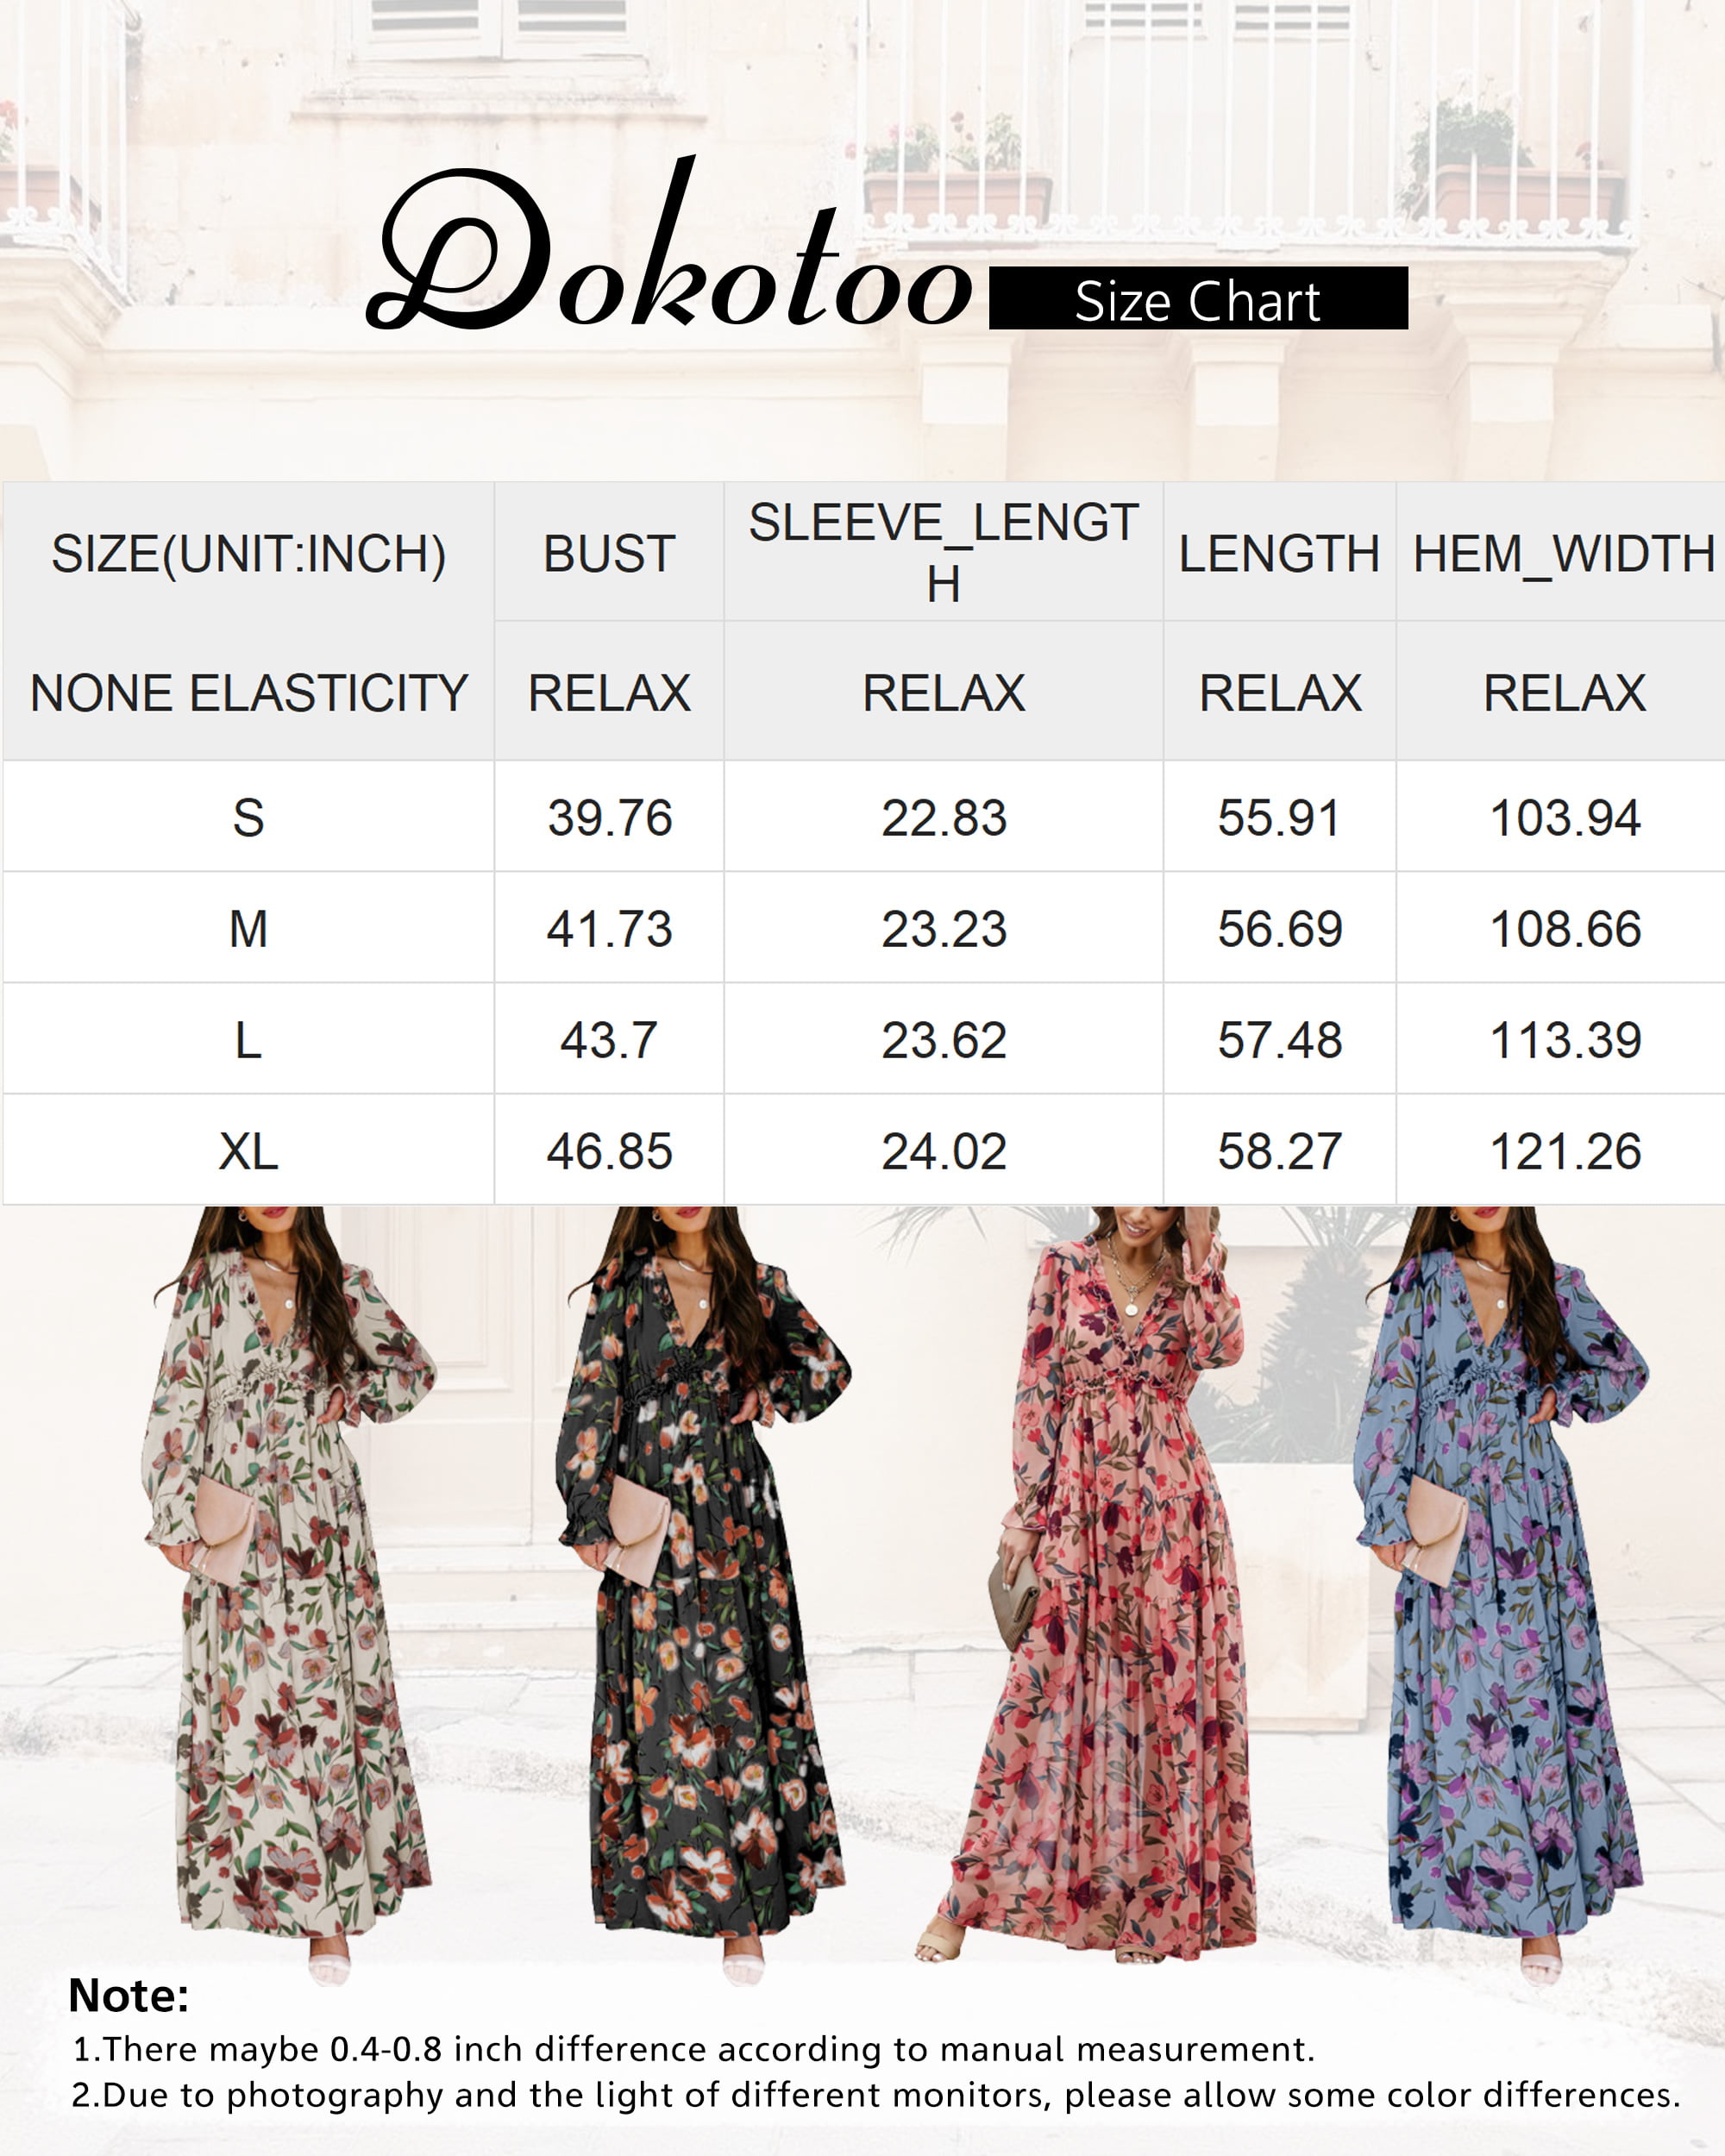 Dokotoo Women's Black Floral Maxi Dresses Casual Deep V Neck Long Sleeve Evening Dress Cocktail Party Dress for Women, US 8-10(M) - image 3 of 8